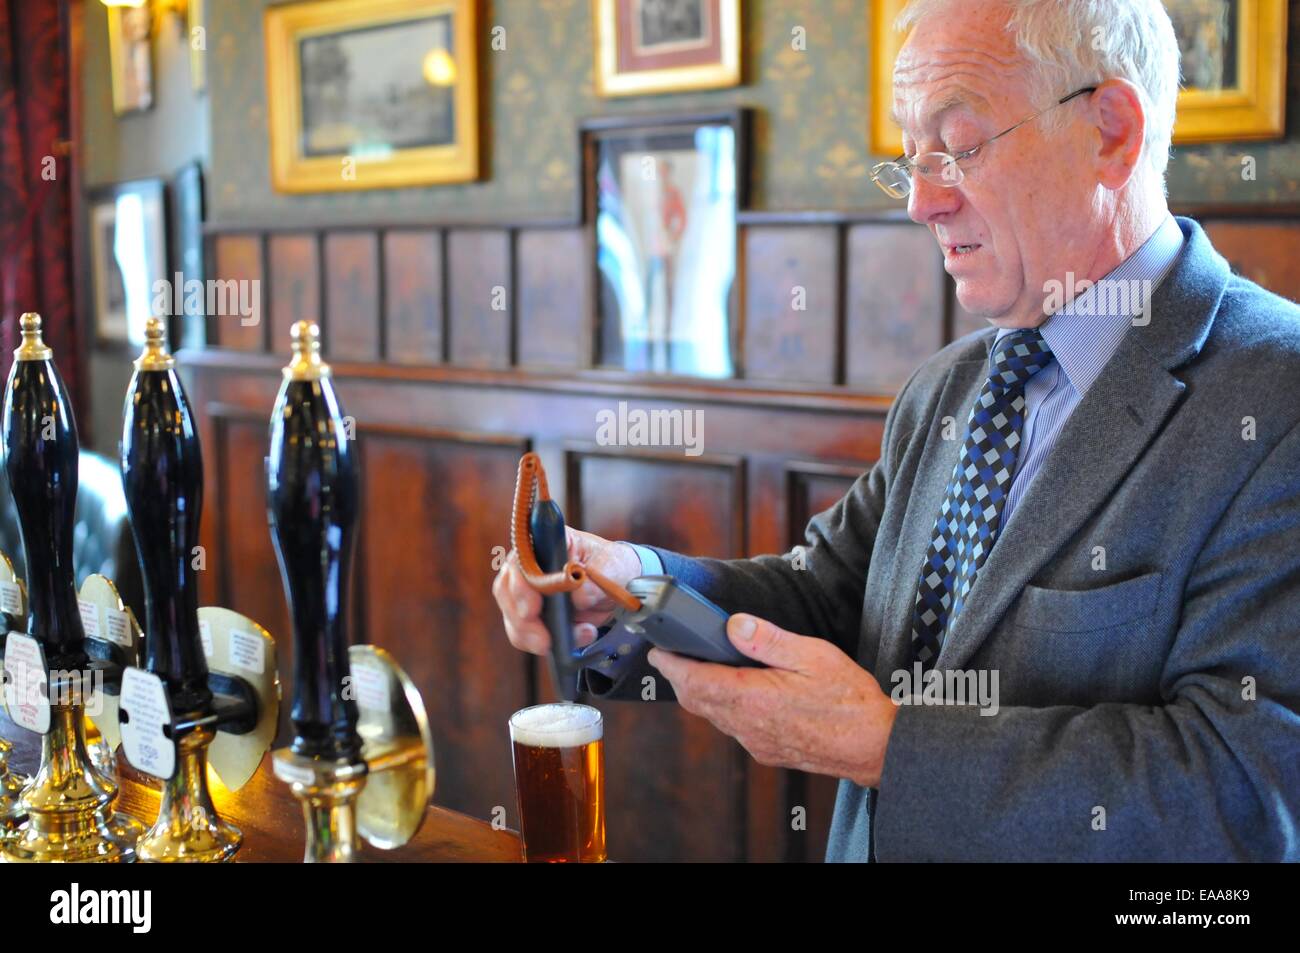 Man from Cask Marque checking the temperature of a glass of beer at The Victoria pub, near Paddington, London Stock Photo